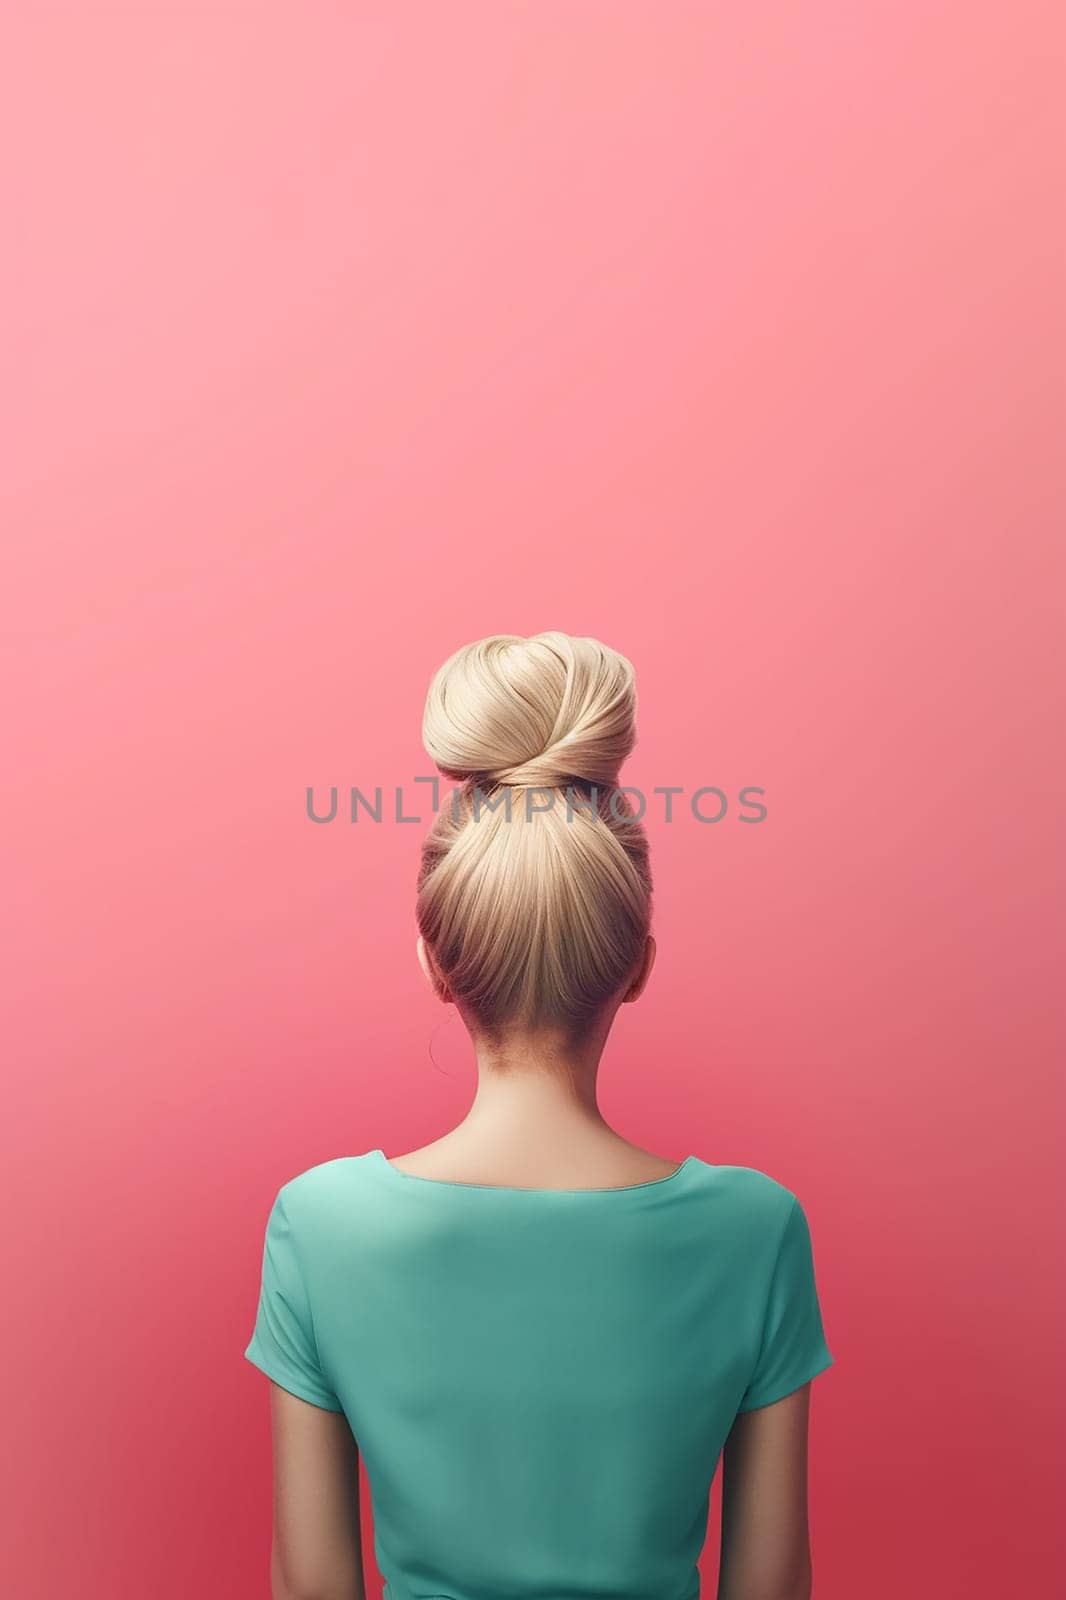 Woman with bun hairstyle facing a pink background. by Hype2art